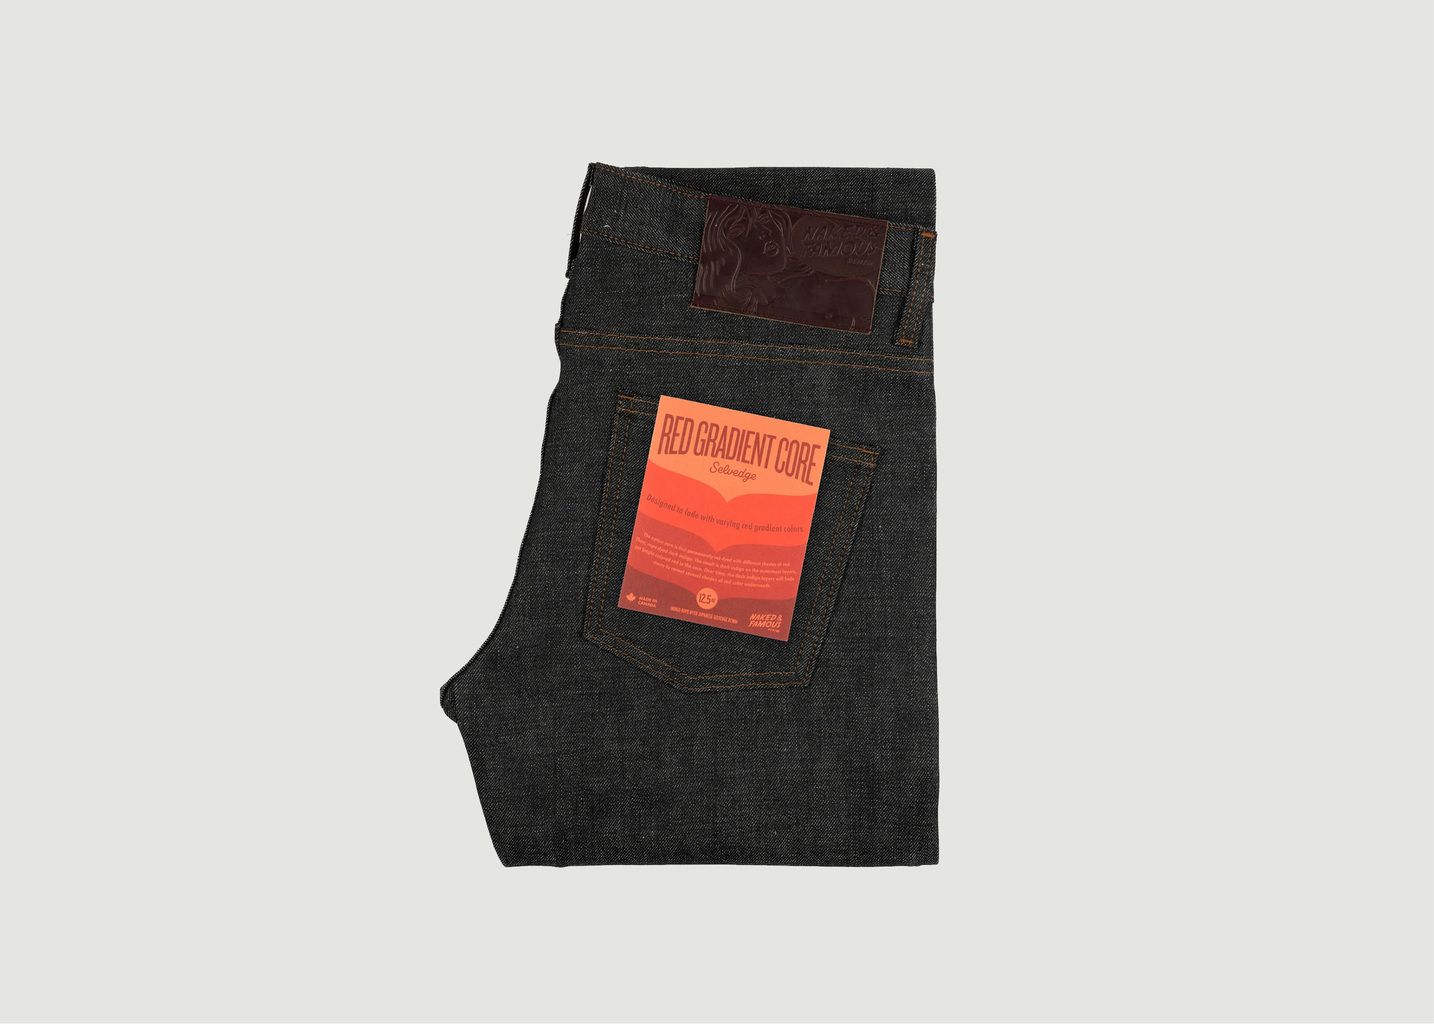 Super Guy Red Gradient Core Selvedge Jeans